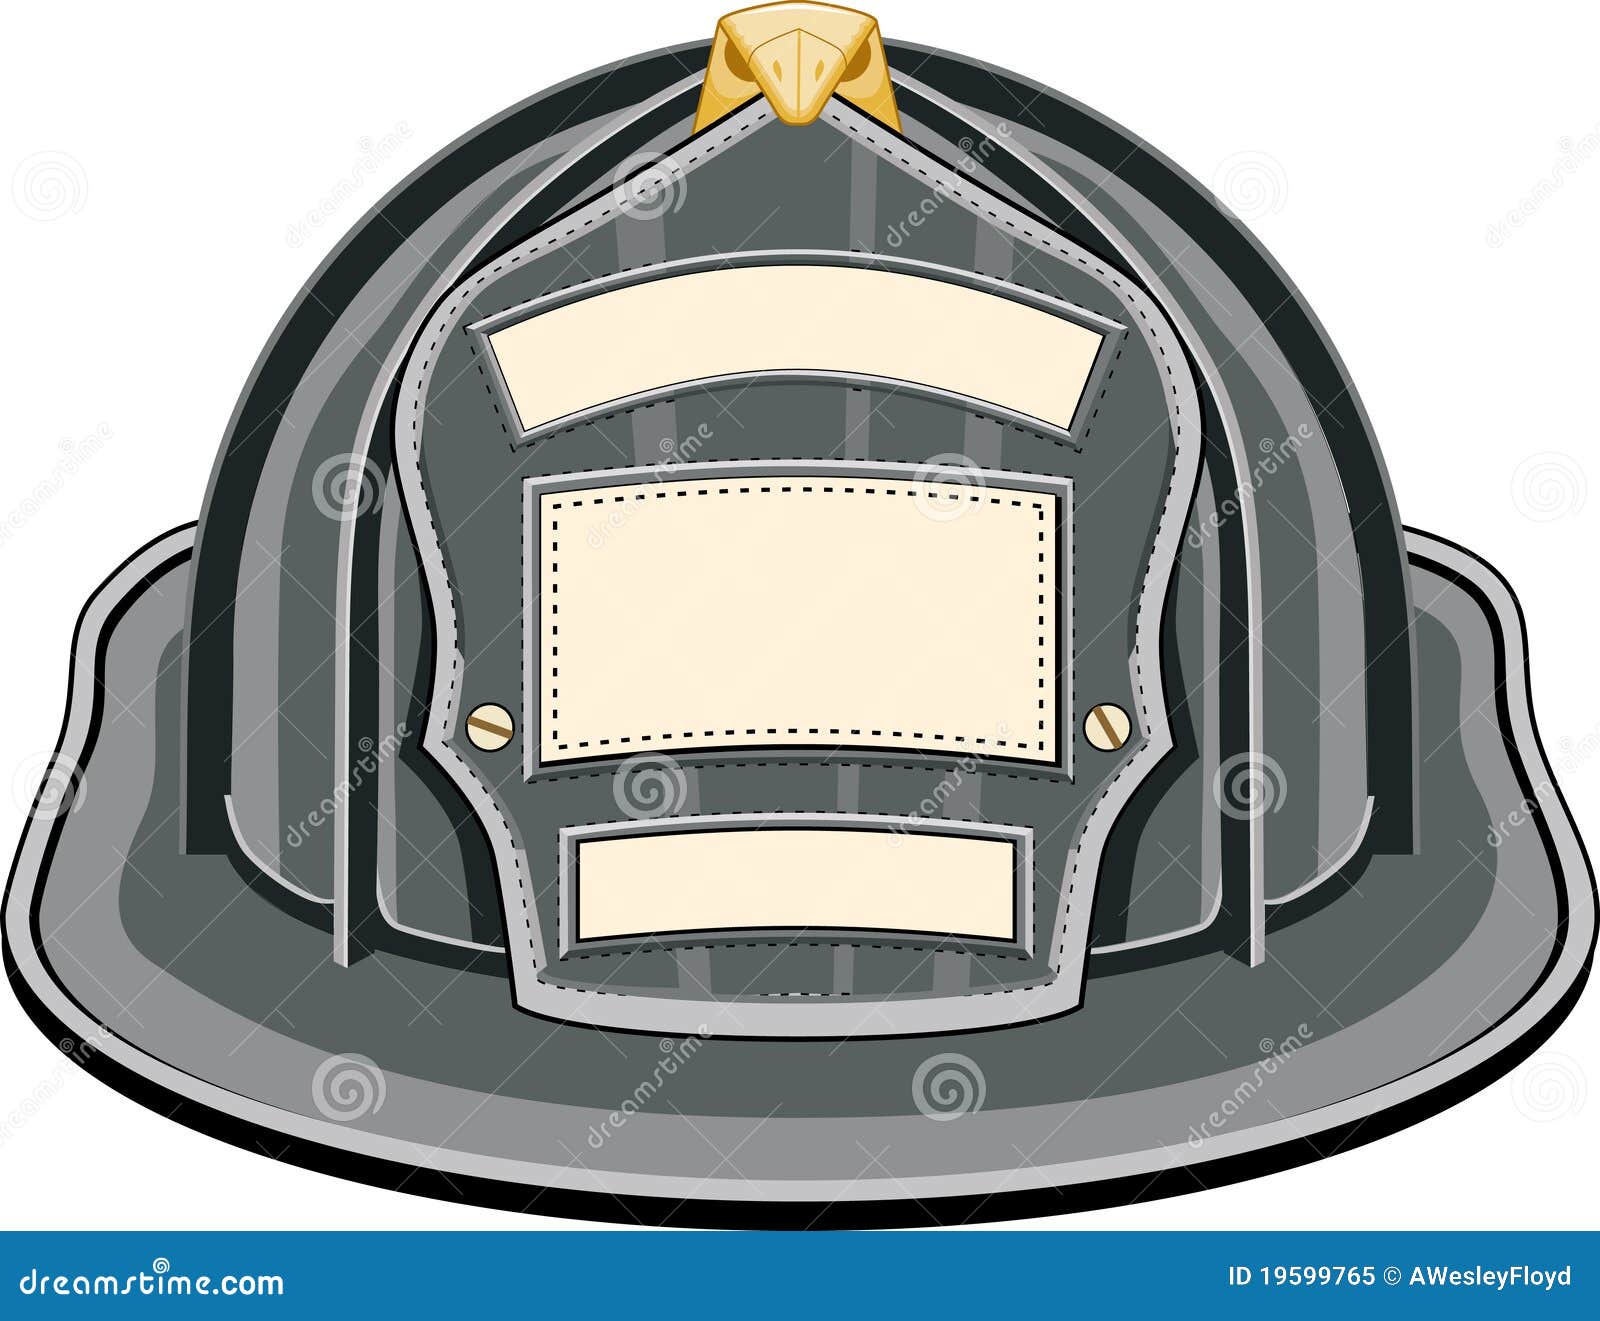 firefighter hat clipart - photo #31